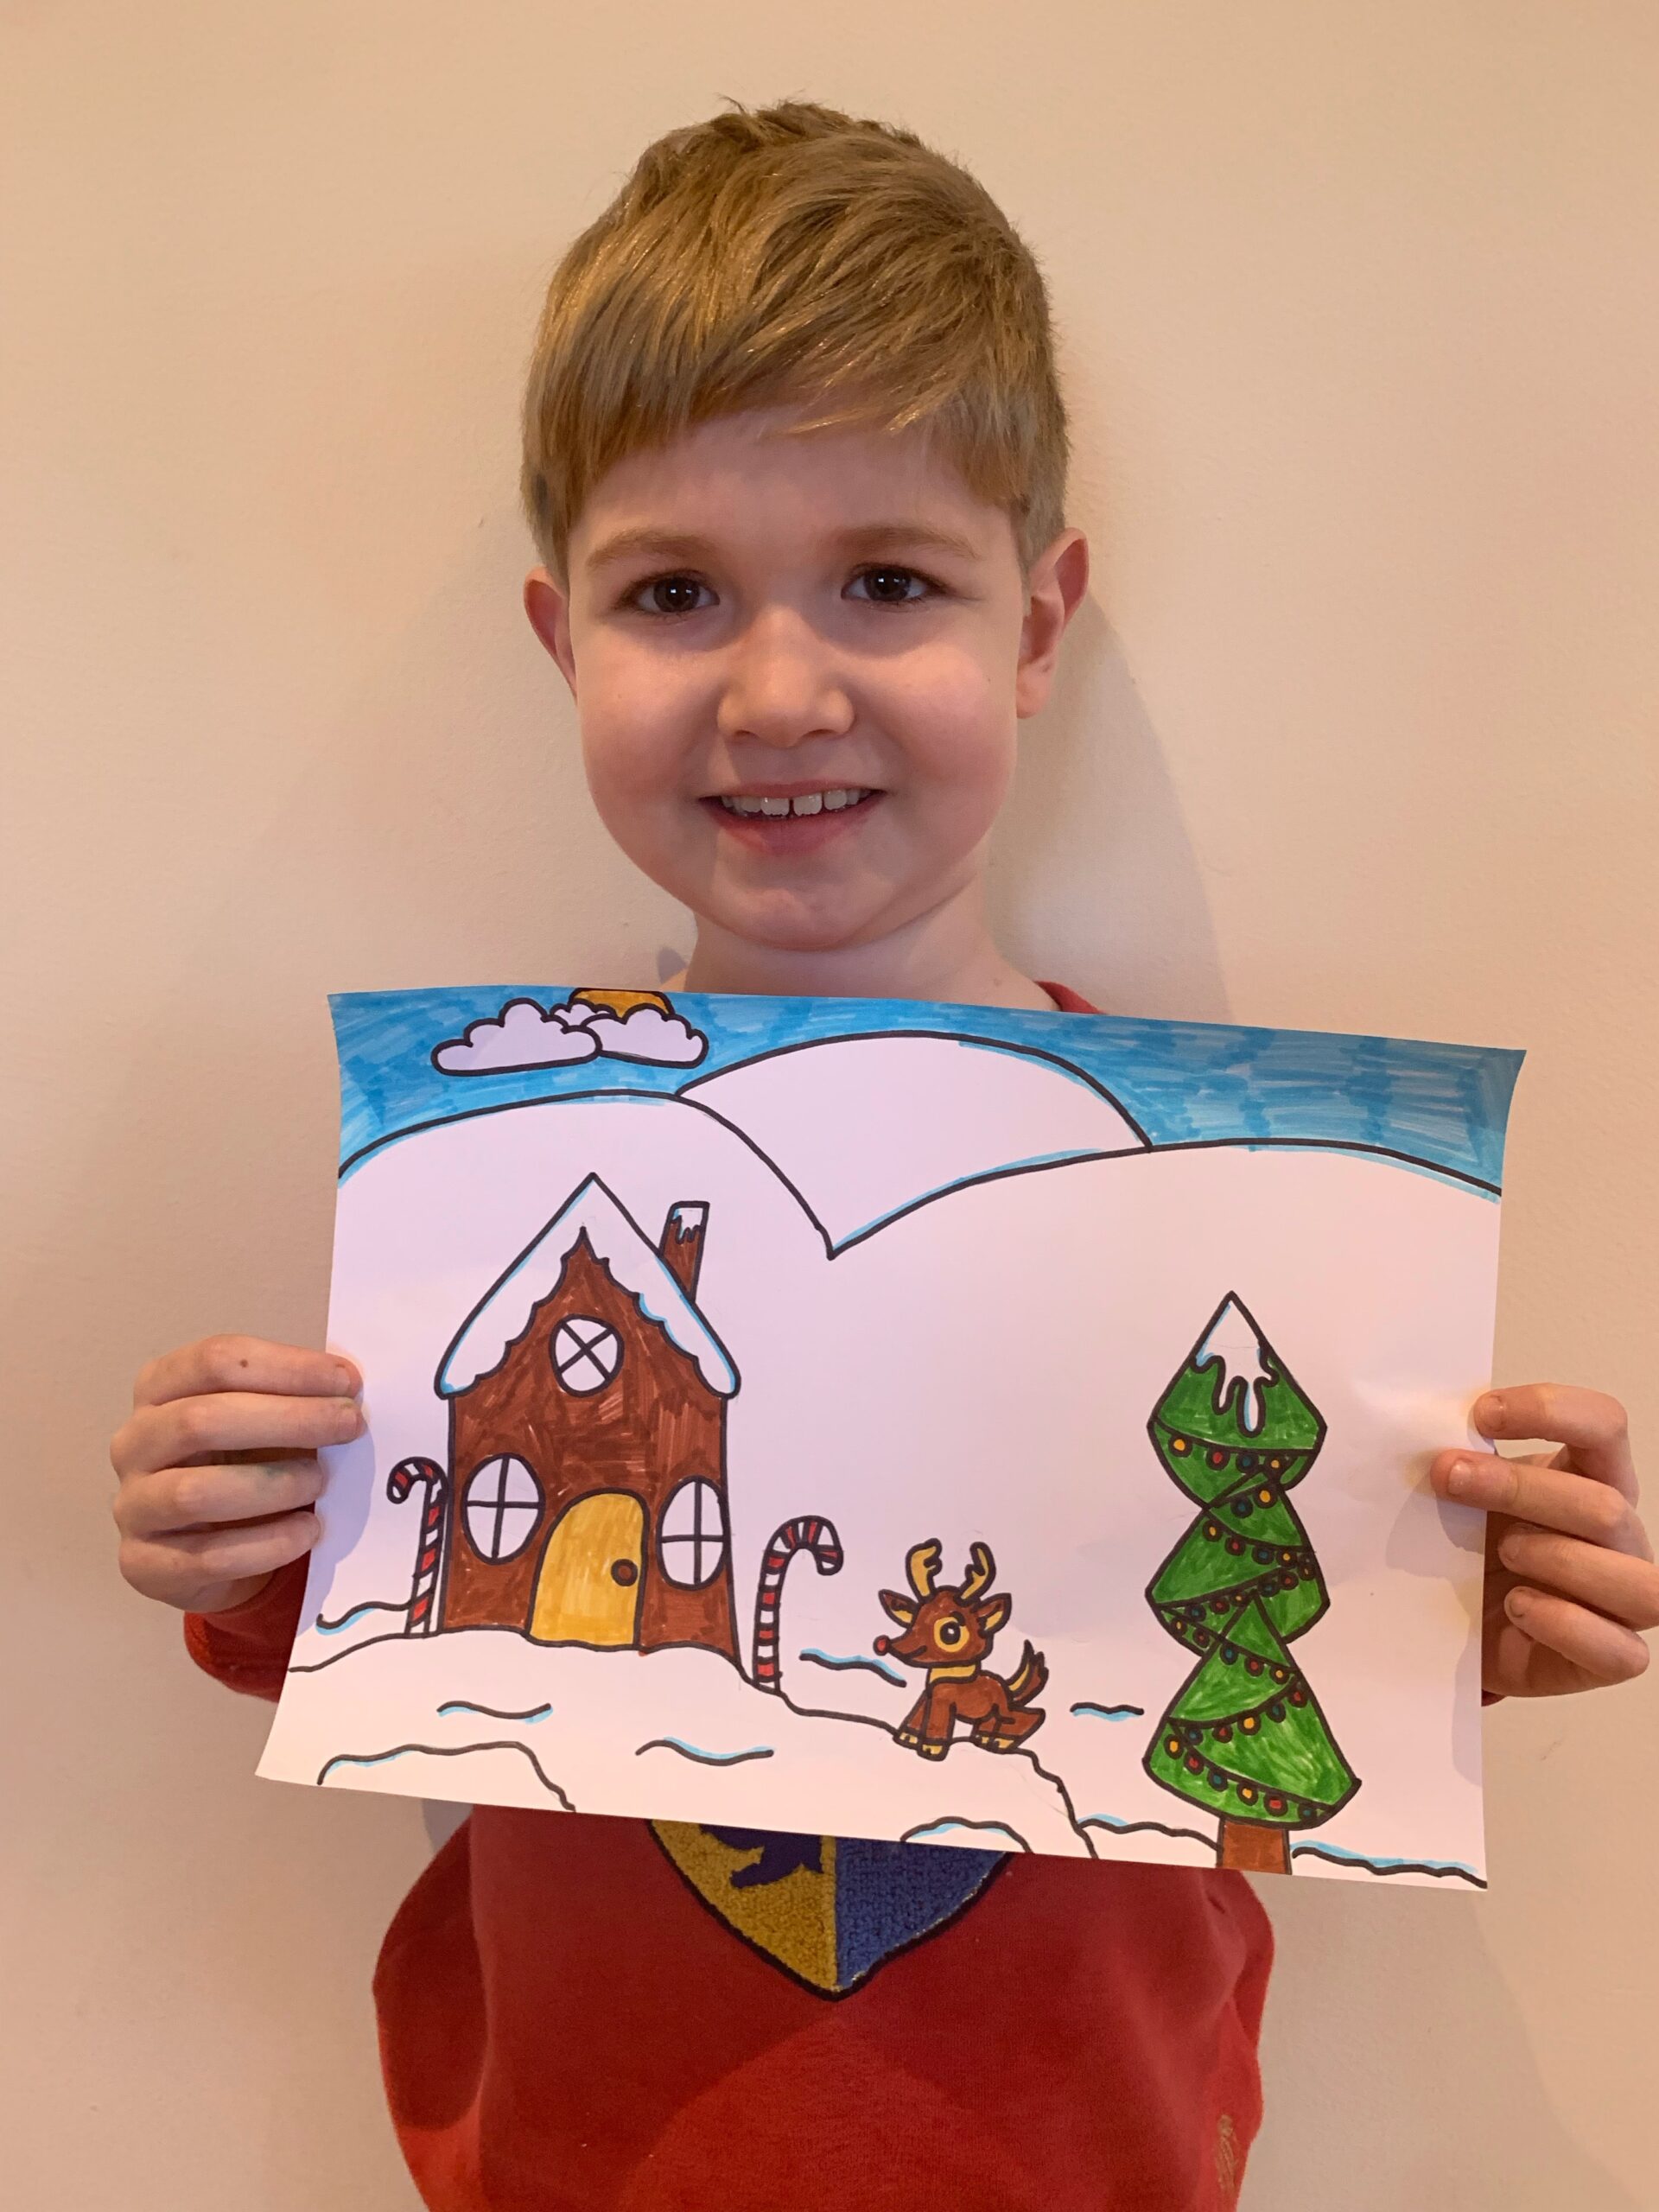 Owen aged 7 with his Duchenneber drawing